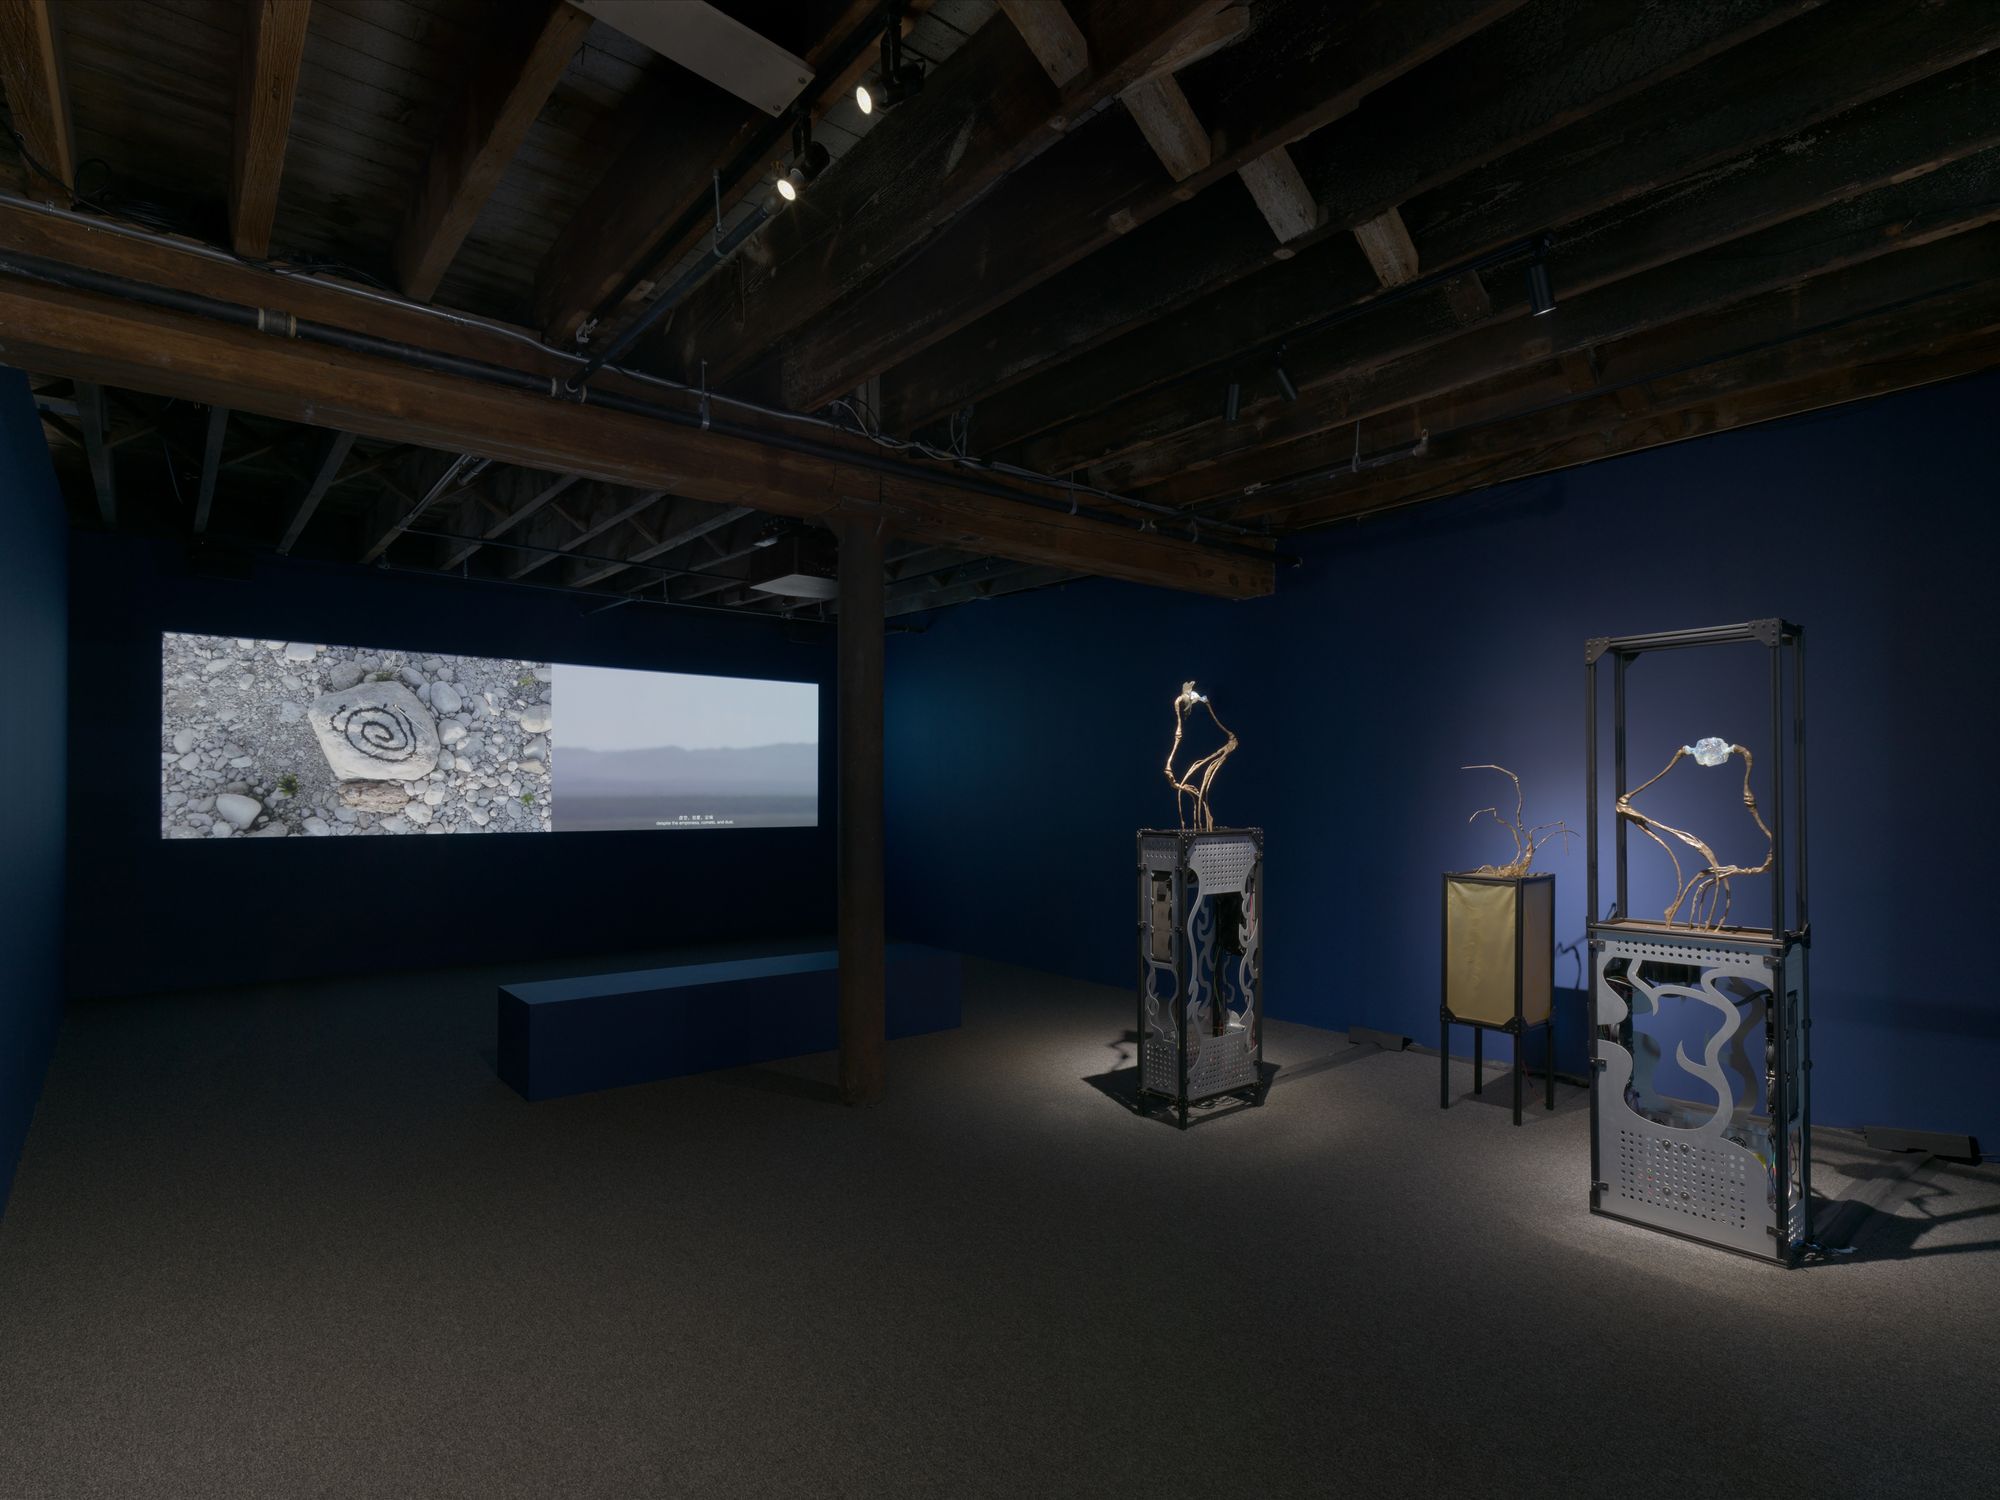 A dark gallery, with a projected spiral image in the corner and other metal-like objects close by.